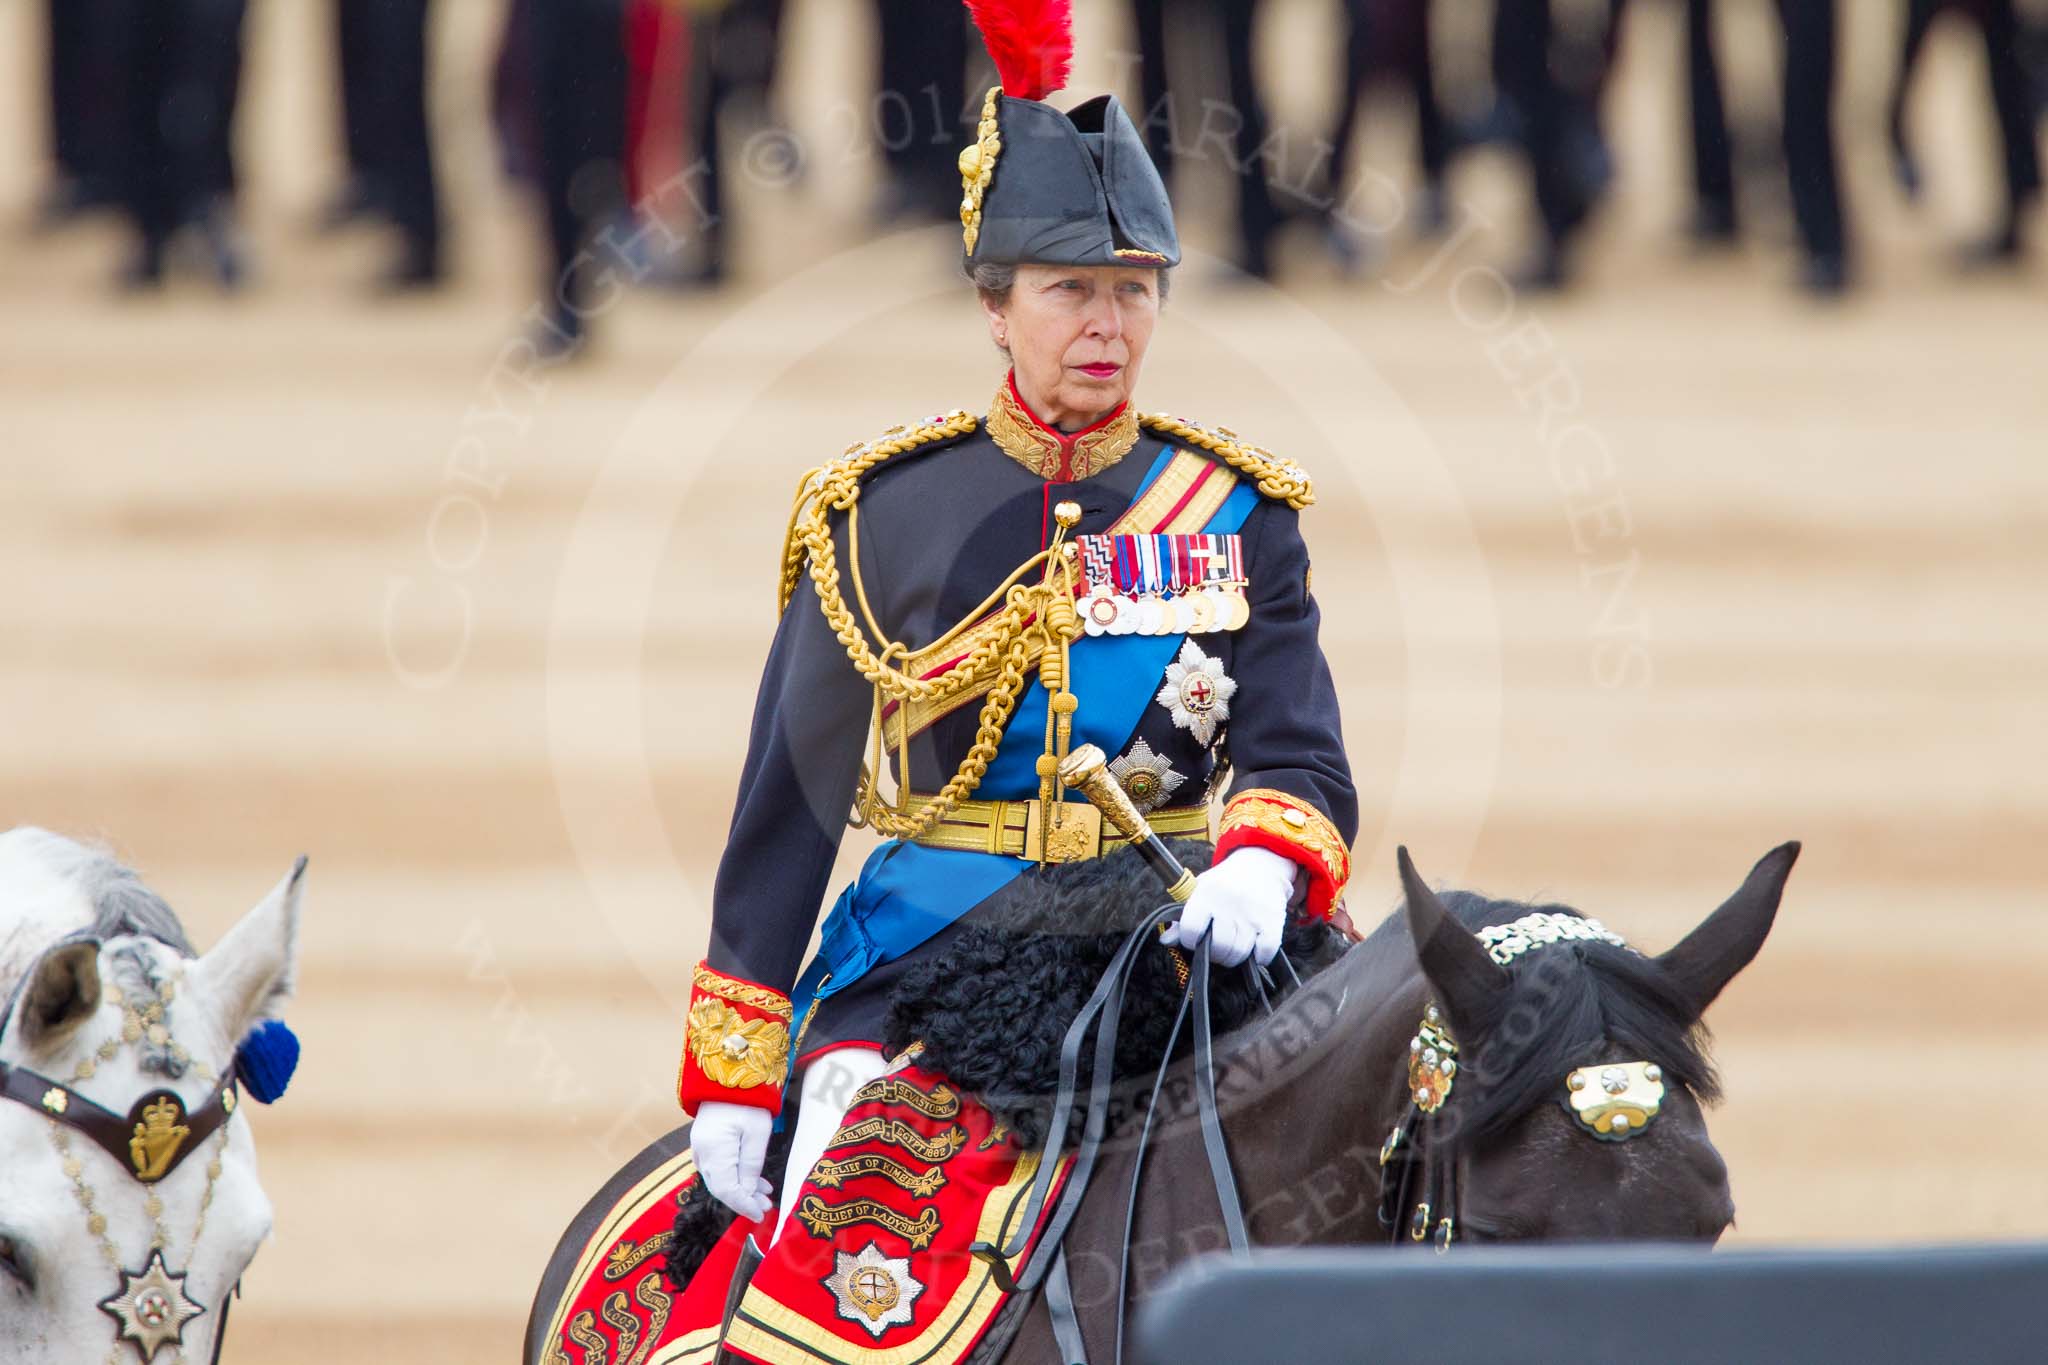 Trooping the Colour 2014.
Horse Guards Parade, Westminster,
London SW1A,

United Kingdom,
on 14 June 2014 at 11:07, image #433